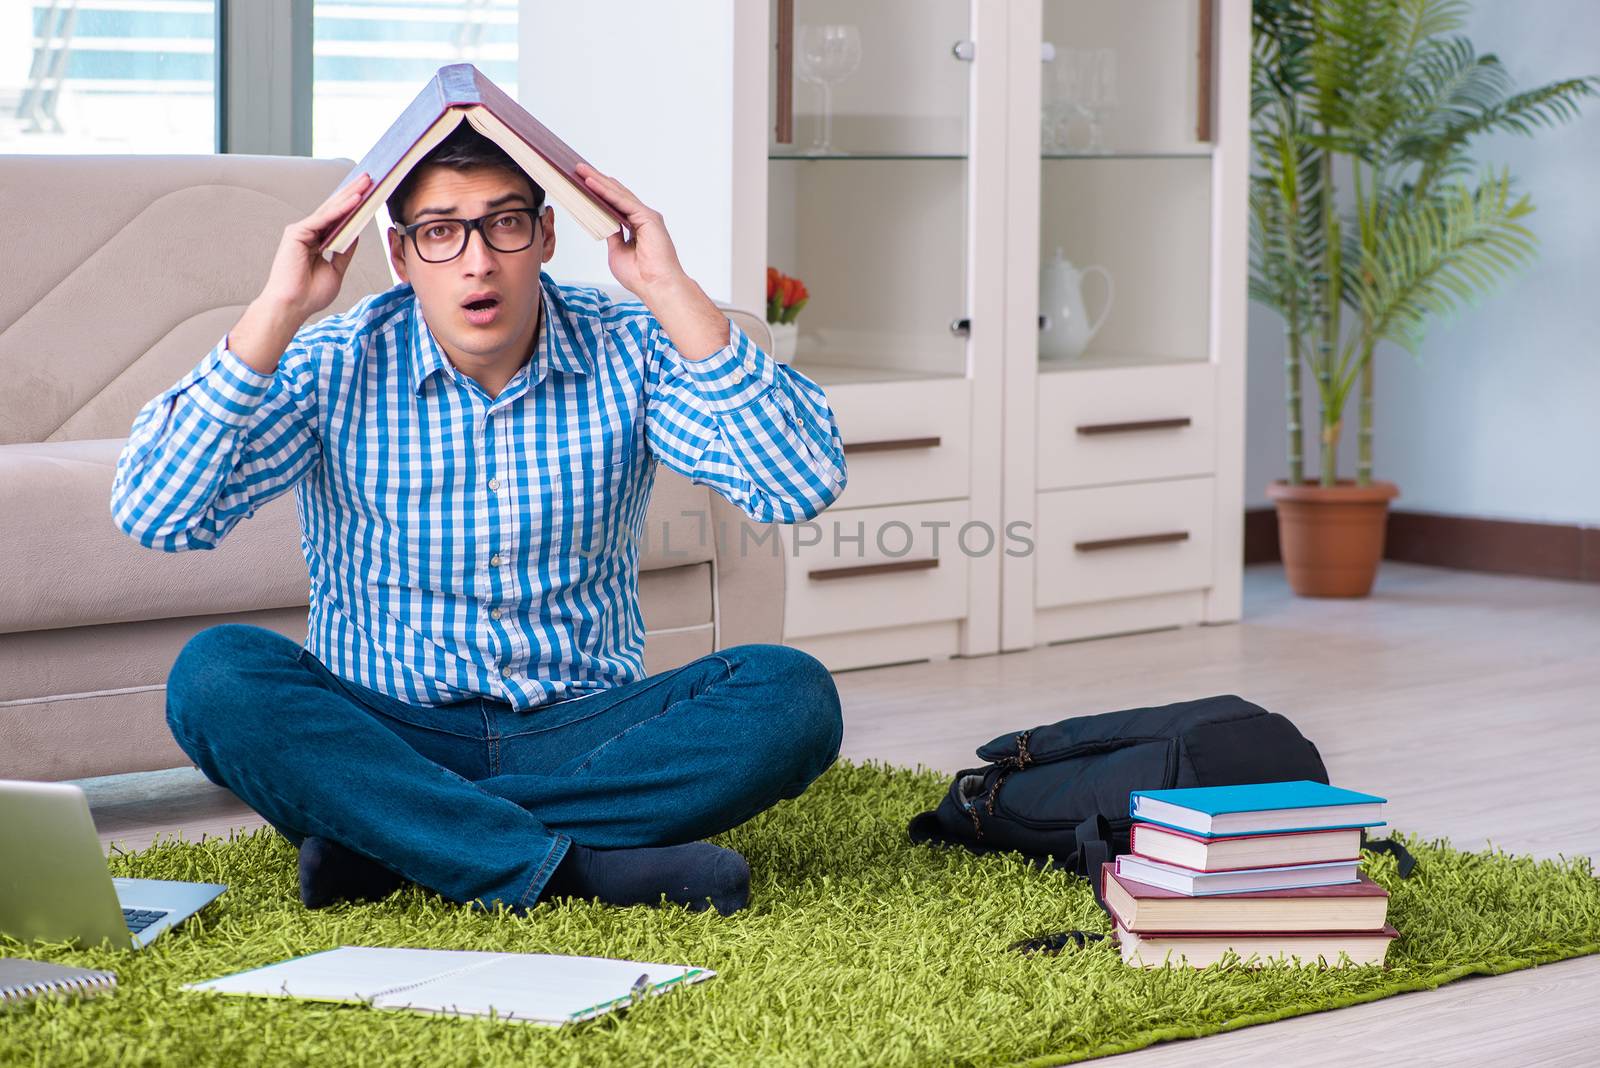 Student meditating and preparing for university exams by Elnur